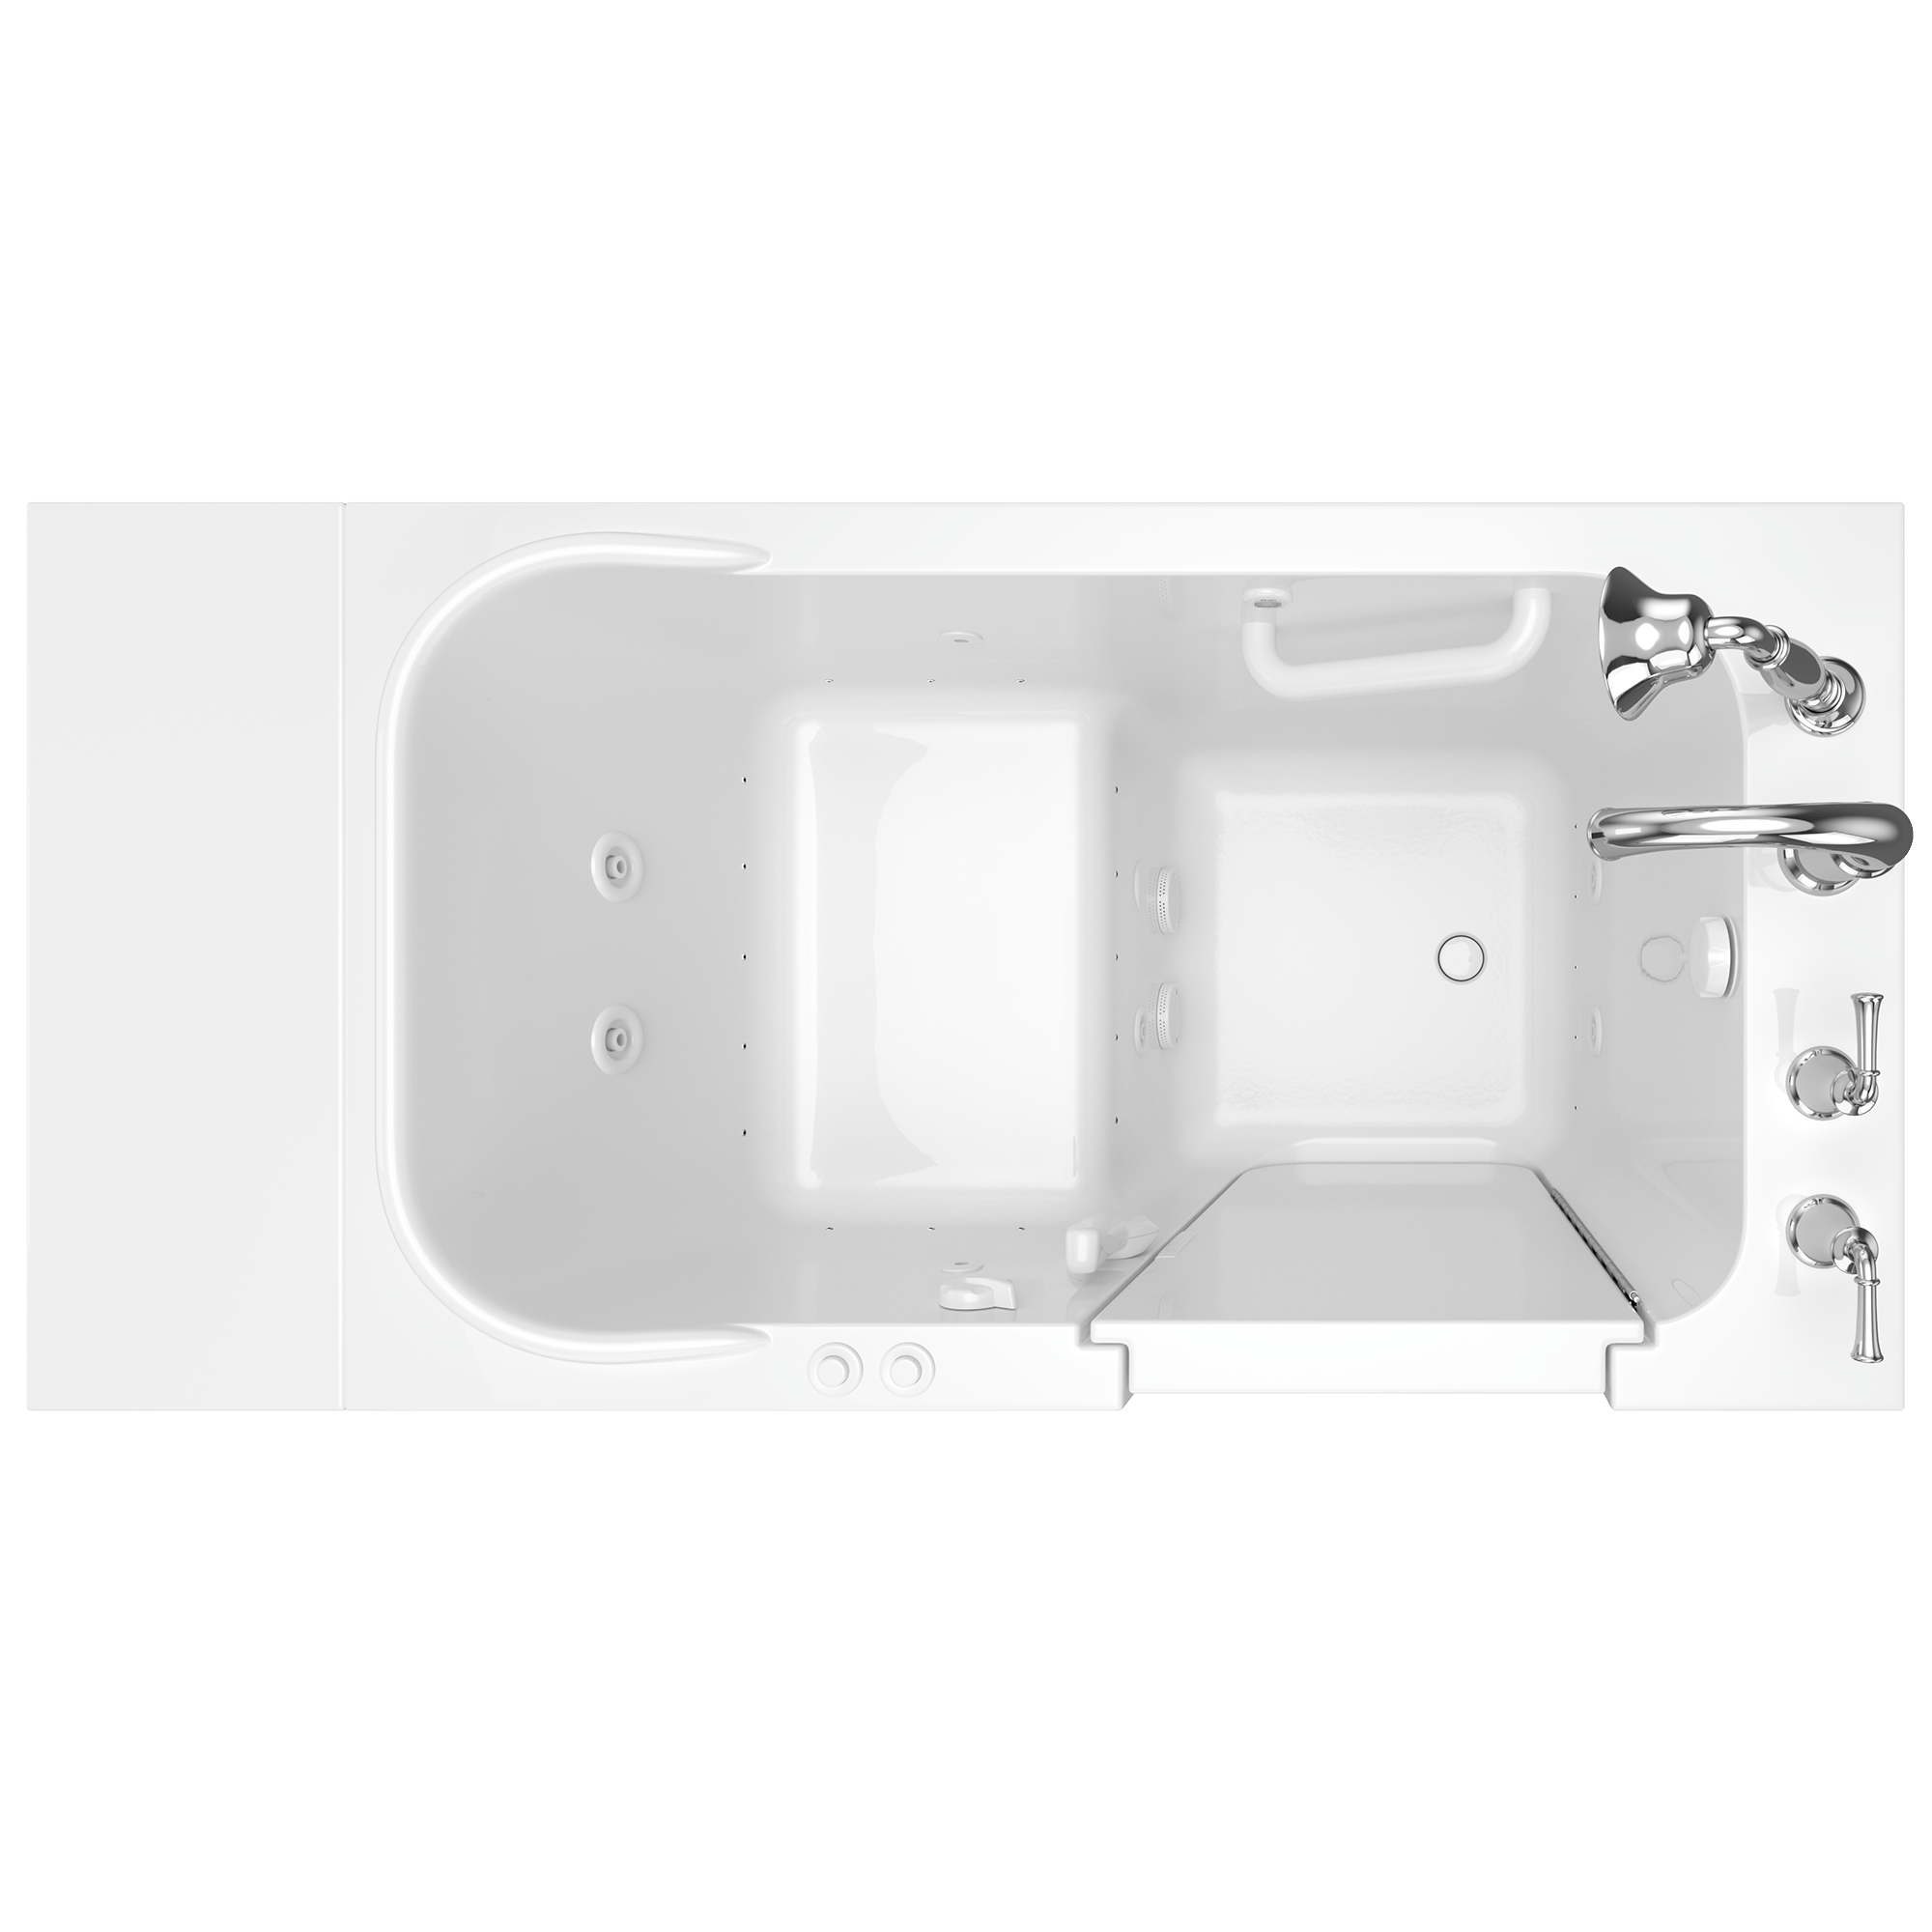 GEL Walk In Tub 48LX28WX38H Right Hand DUAL White ST WHITE